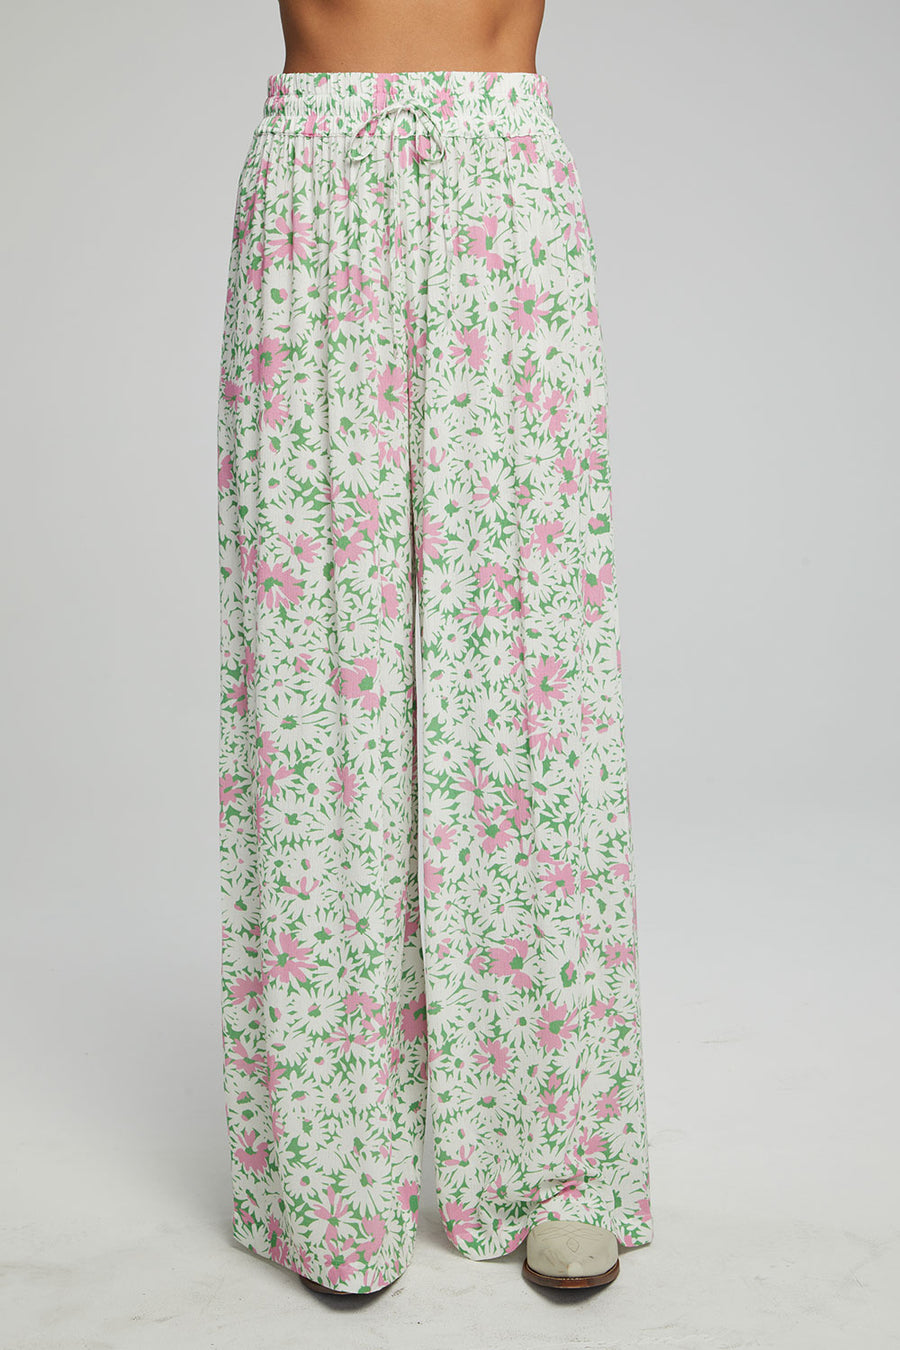 Hudson Joggers - Grass Daisy Floral WOMENS chaserbrand